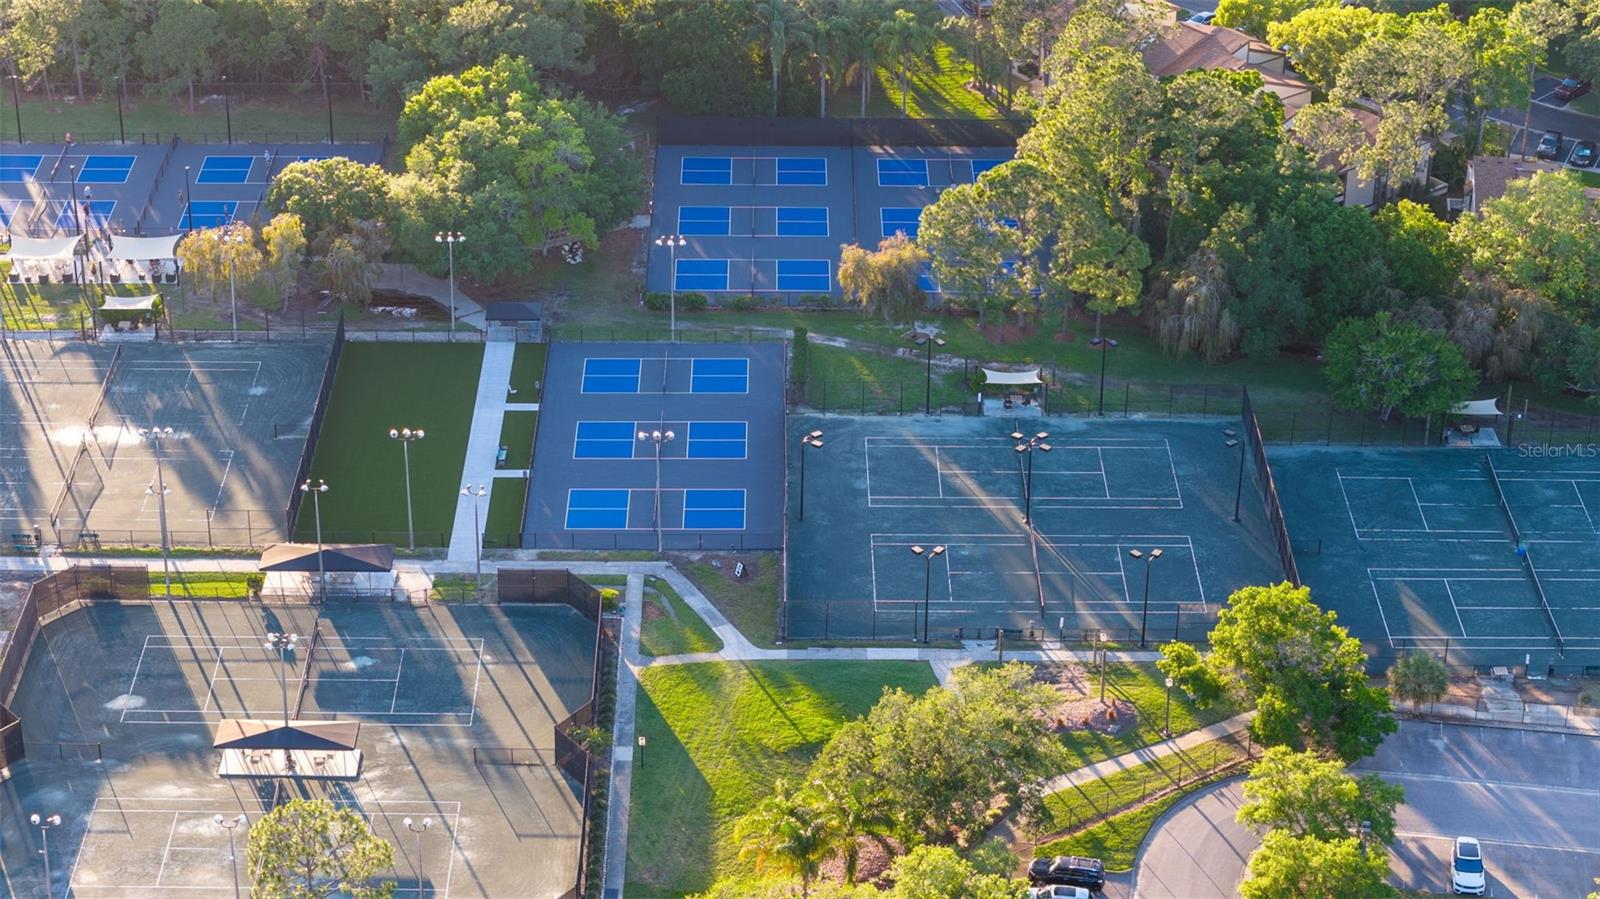 HOA Amenity -Aerial view of 12 clay tennis courts and 13 pickleball courts